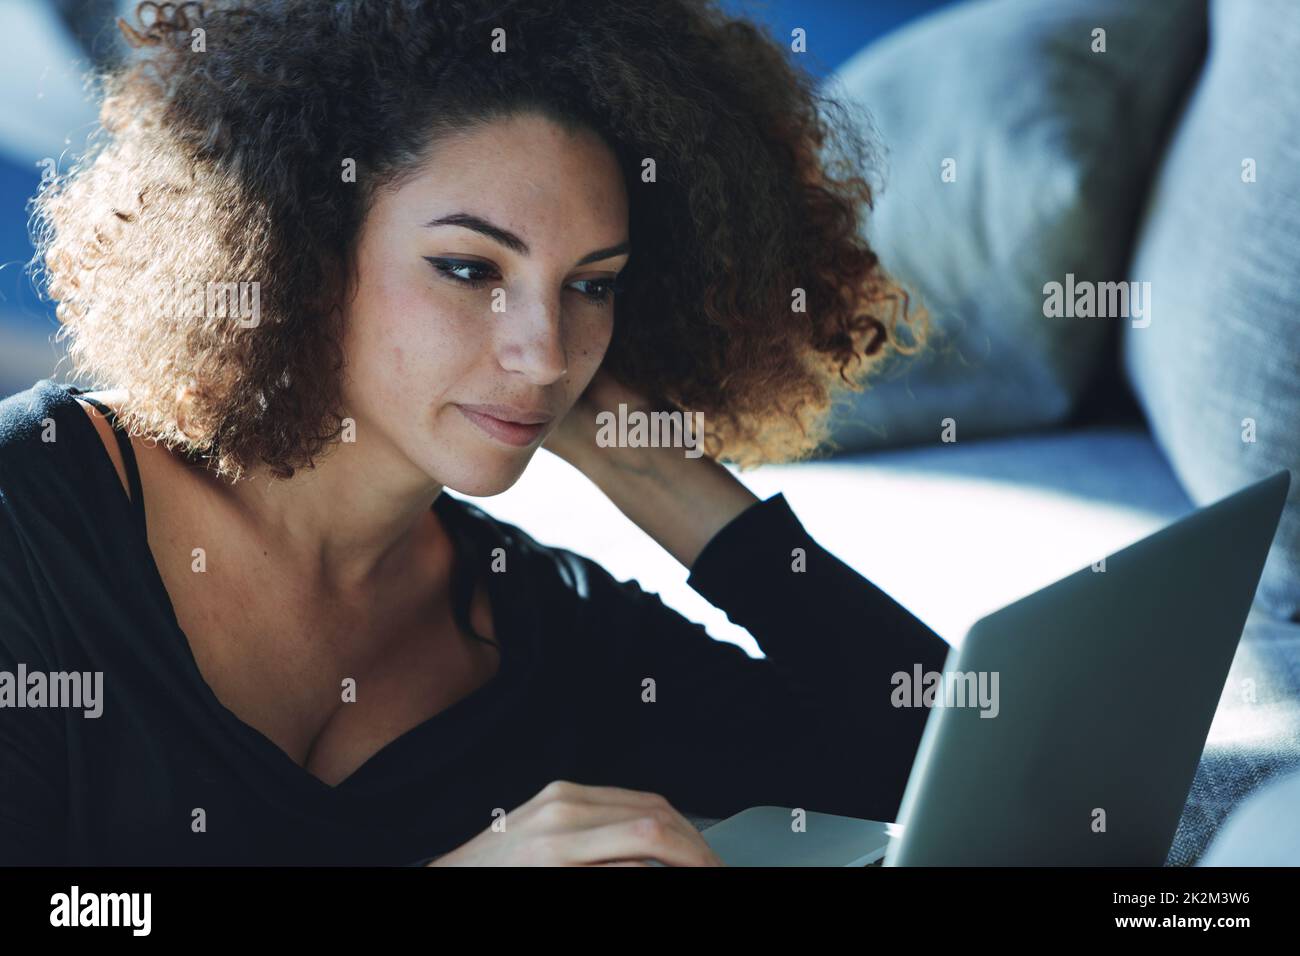 Attractive young woman engrossed in using a laptop computer Stock Photo